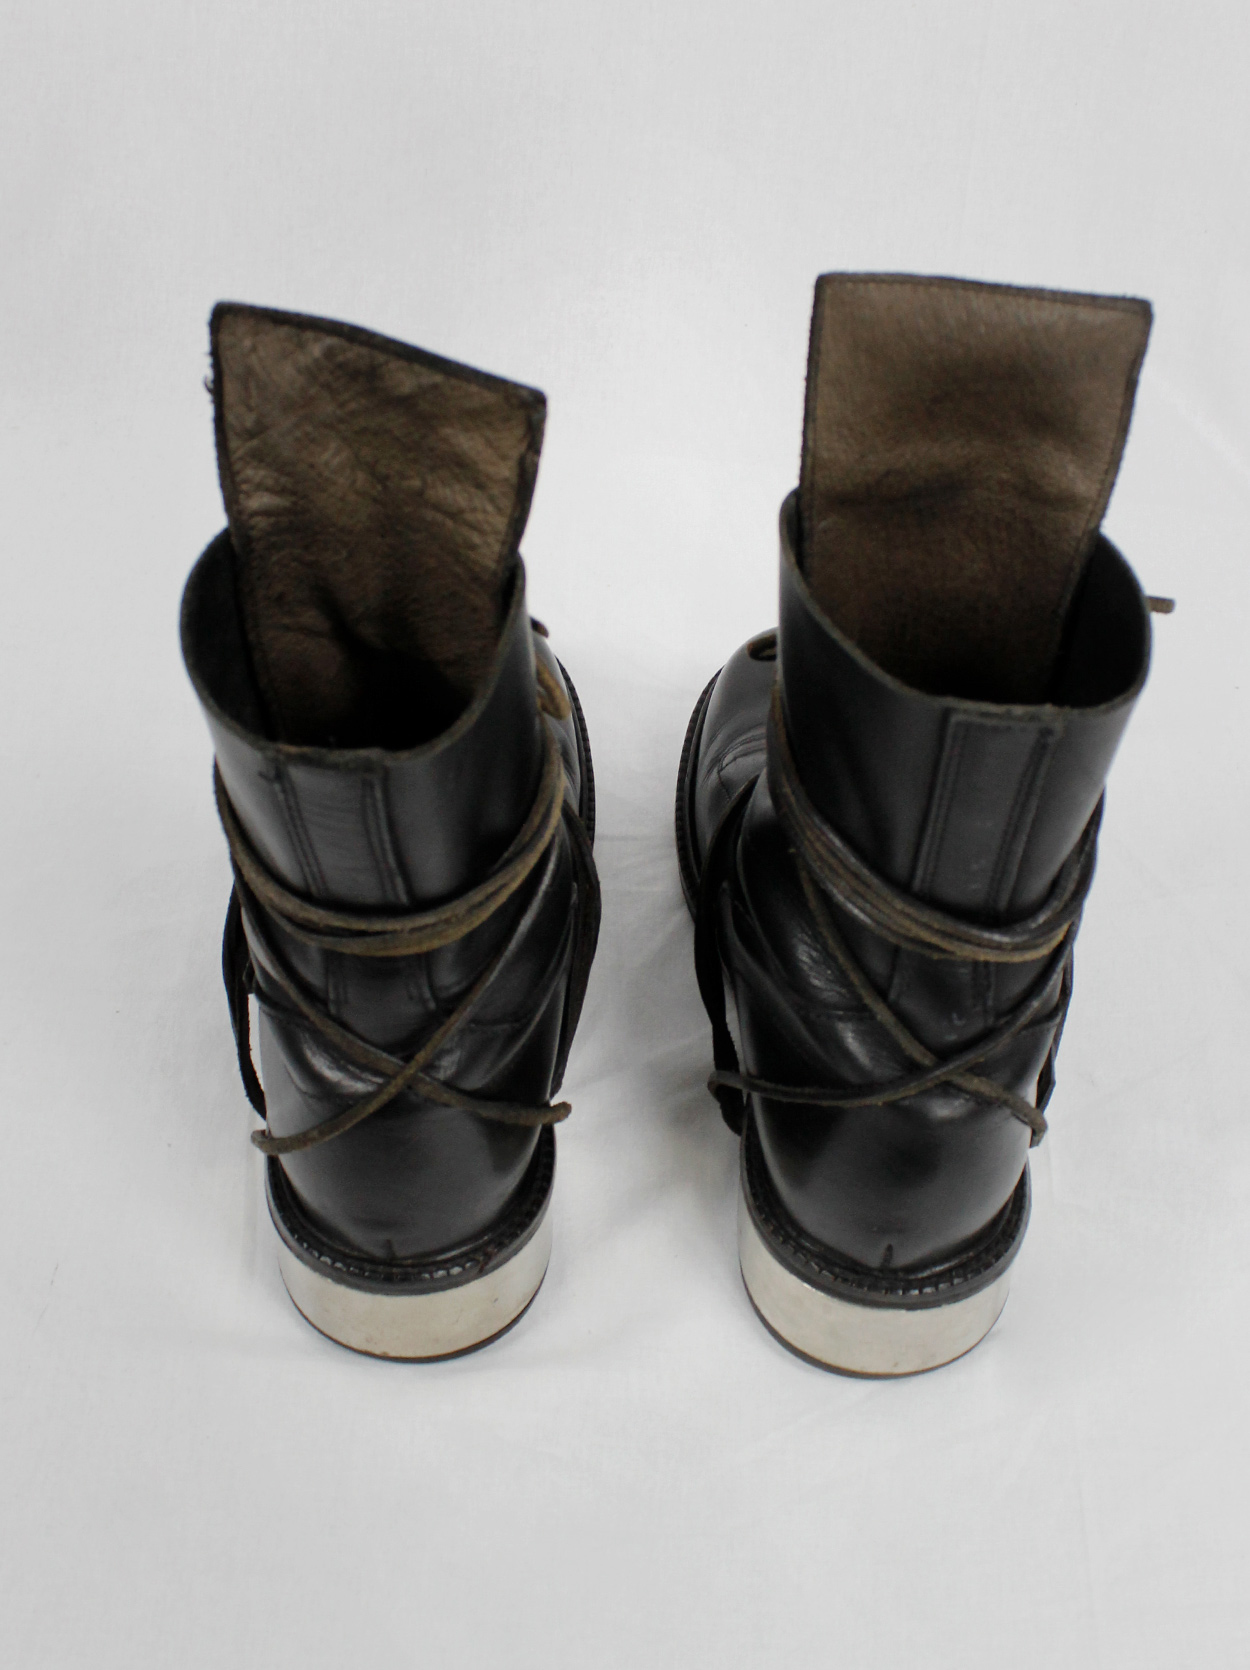 Dirk Bikkembergs black tall boots with belt and laces through the metal ...